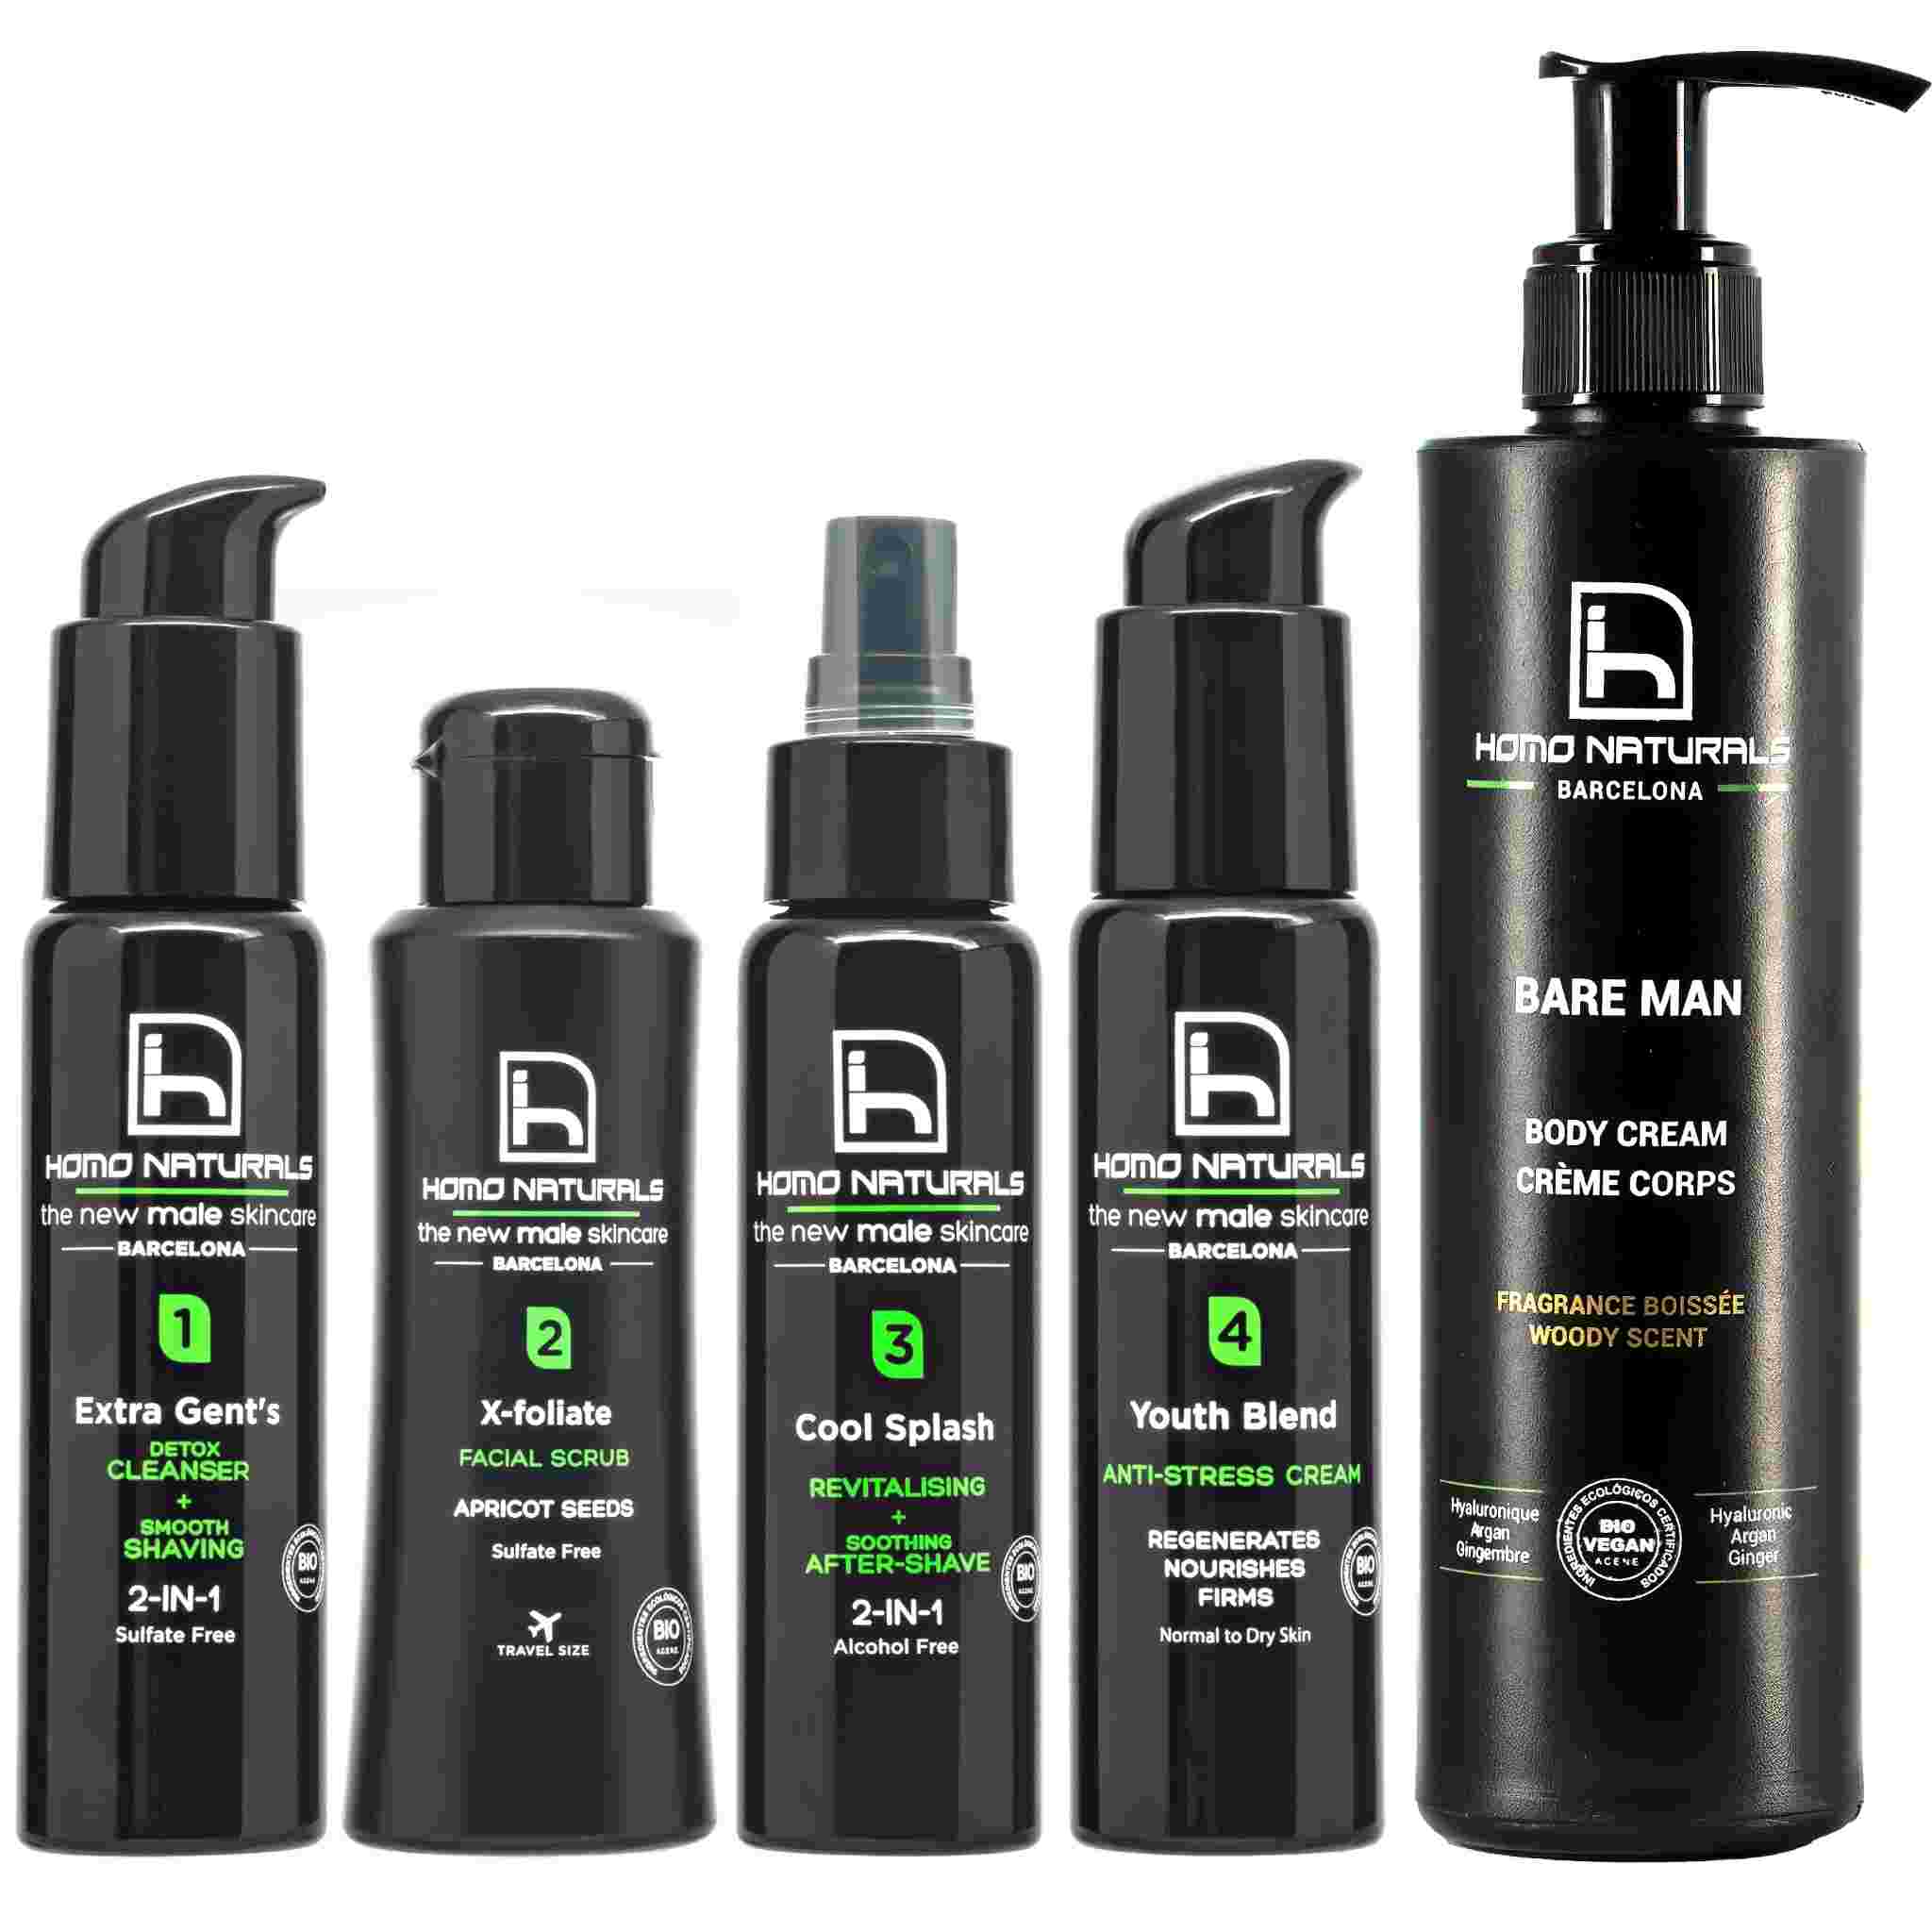 Facial and body care kit for men. With anti-wrinkle cream and body cream for men